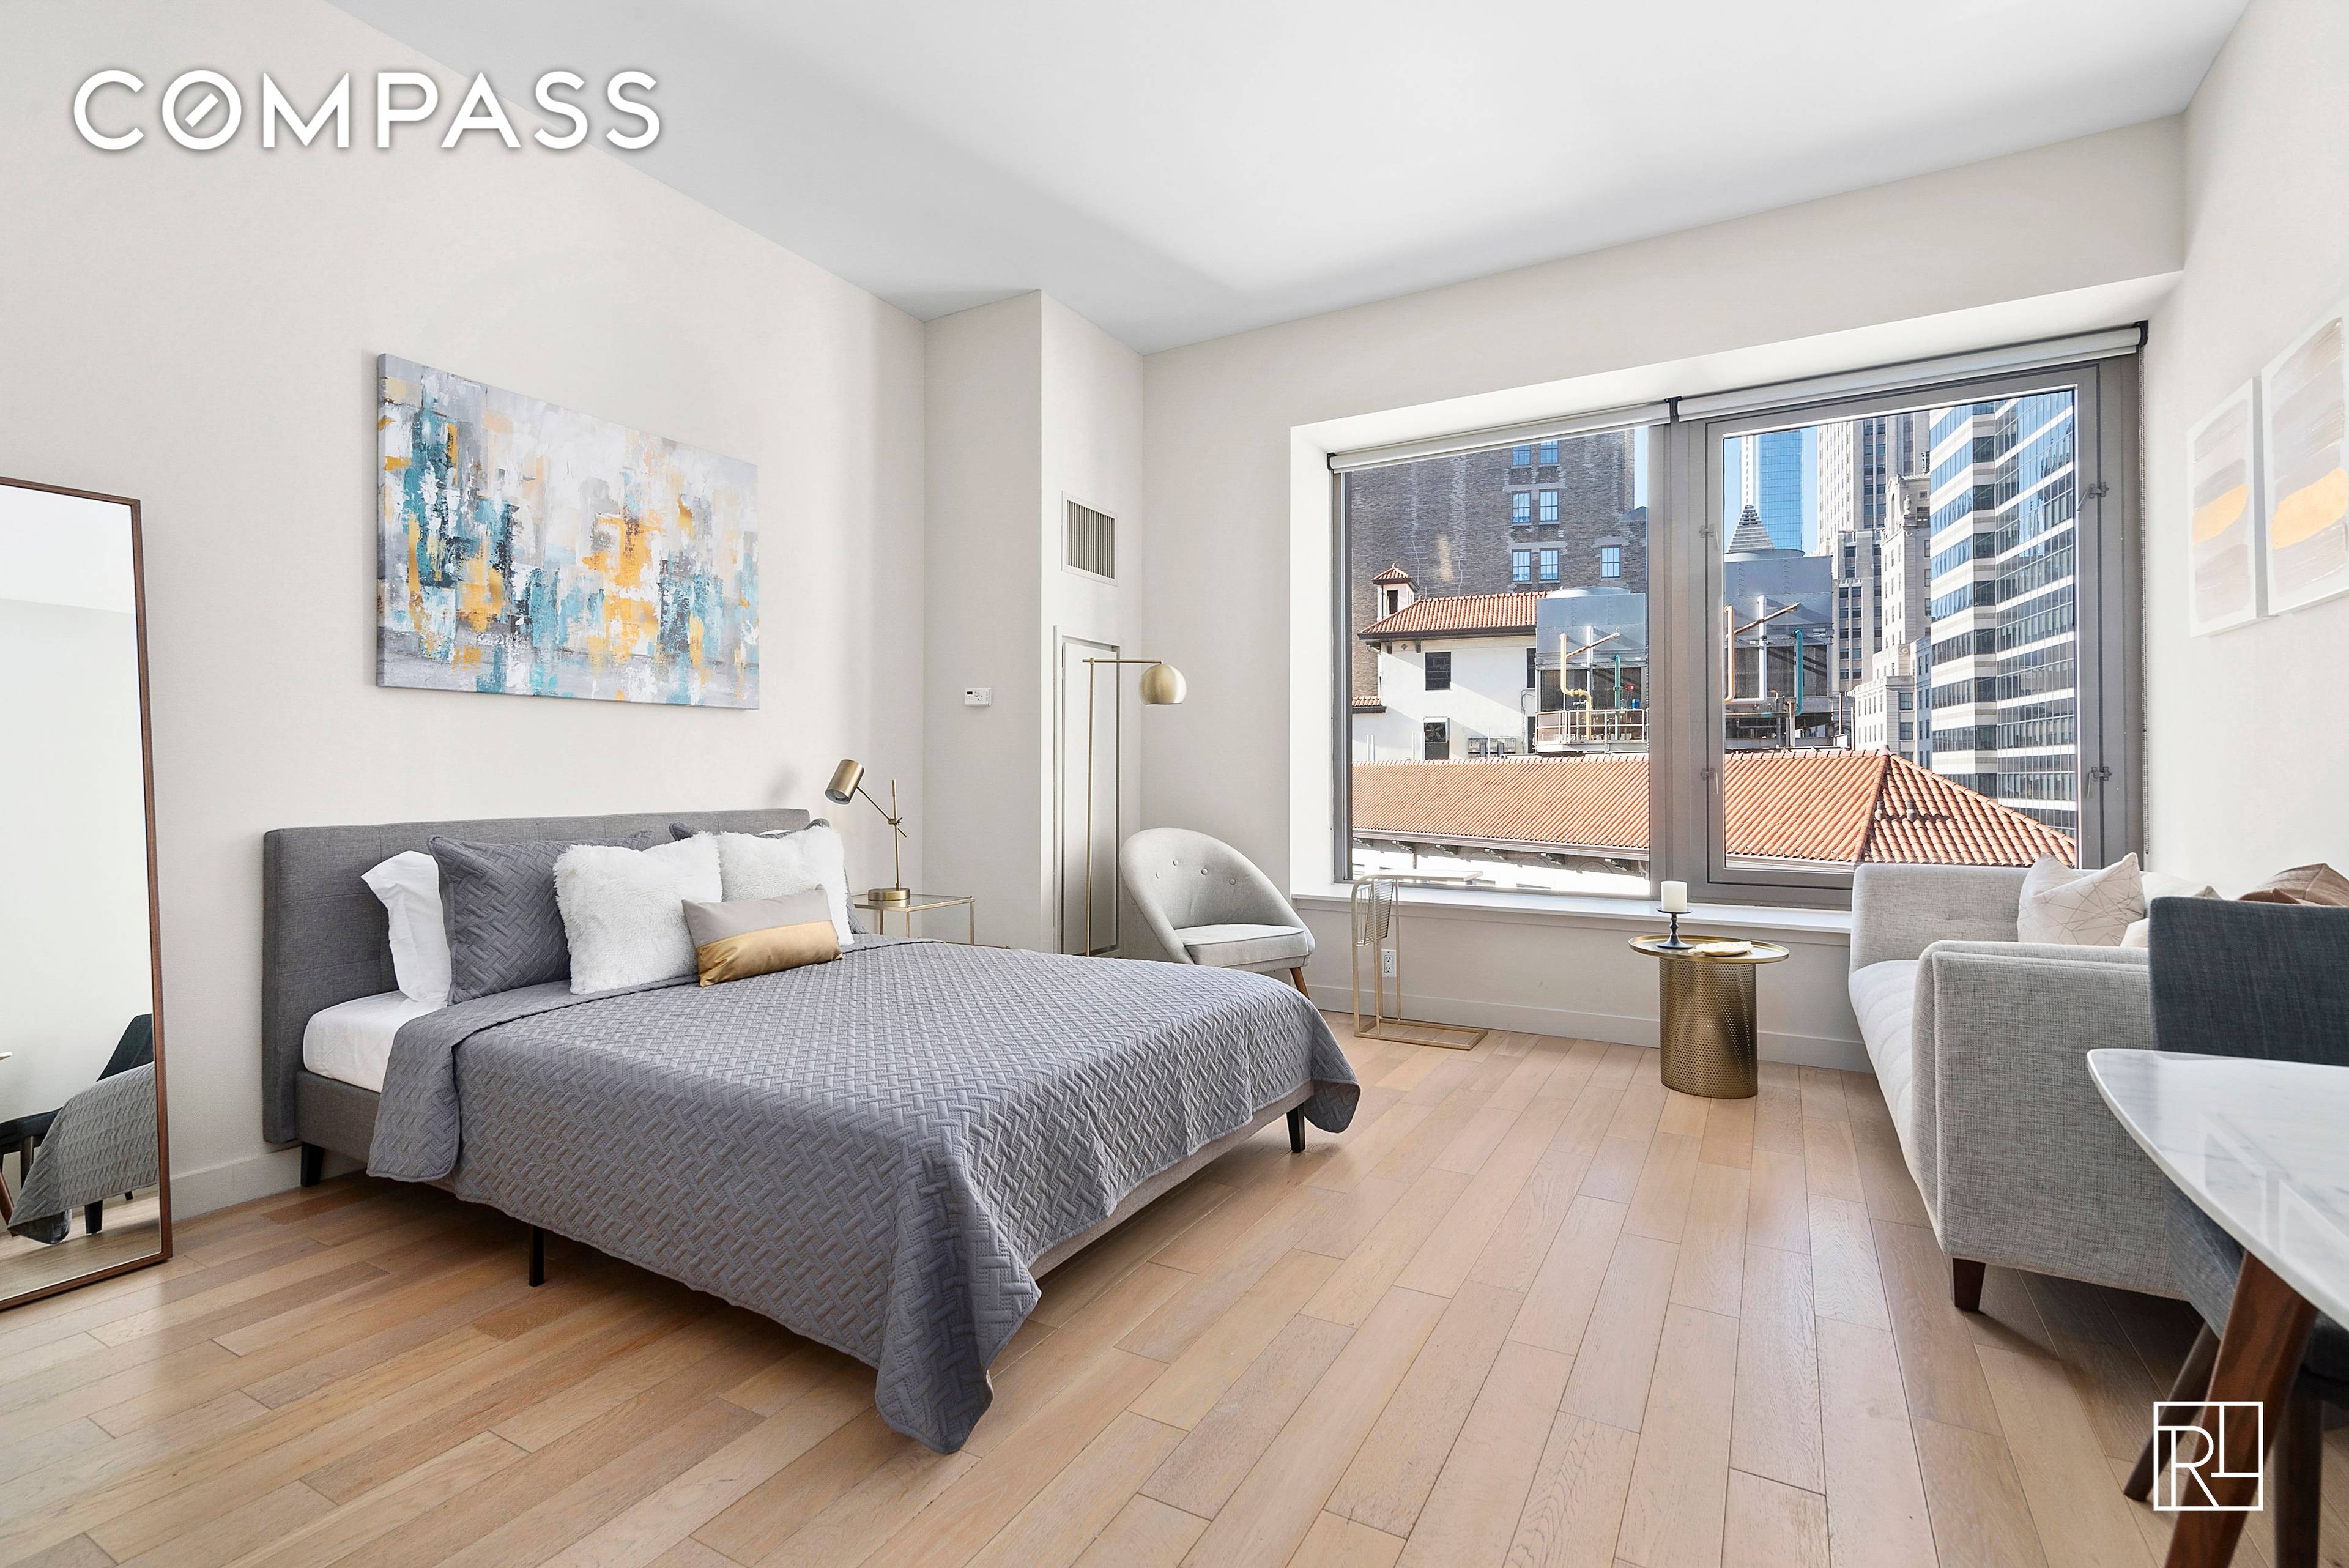 IT'S AVAILABLE ! Introducing apartment 28L, a contemporary and stylish studio residence located in one of Financial District s most sought after high rise condominiums.